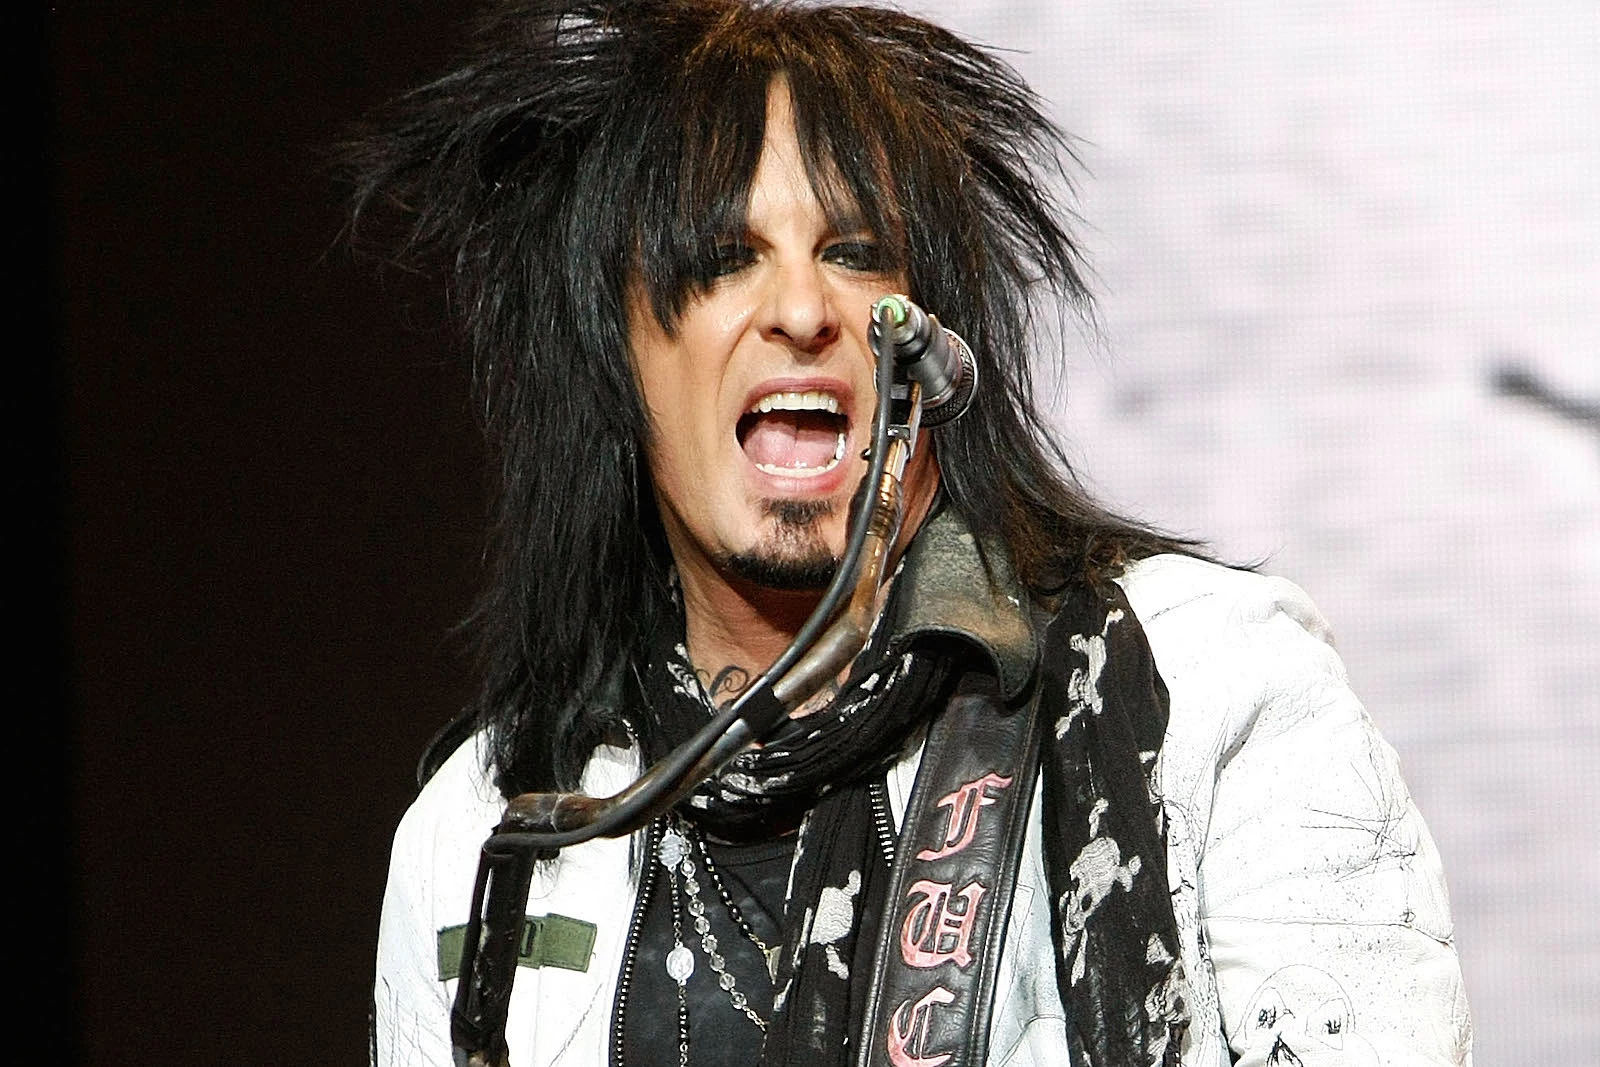 Motley Crue's Nikki Sixx describes being kicked out of Canada in the '80s